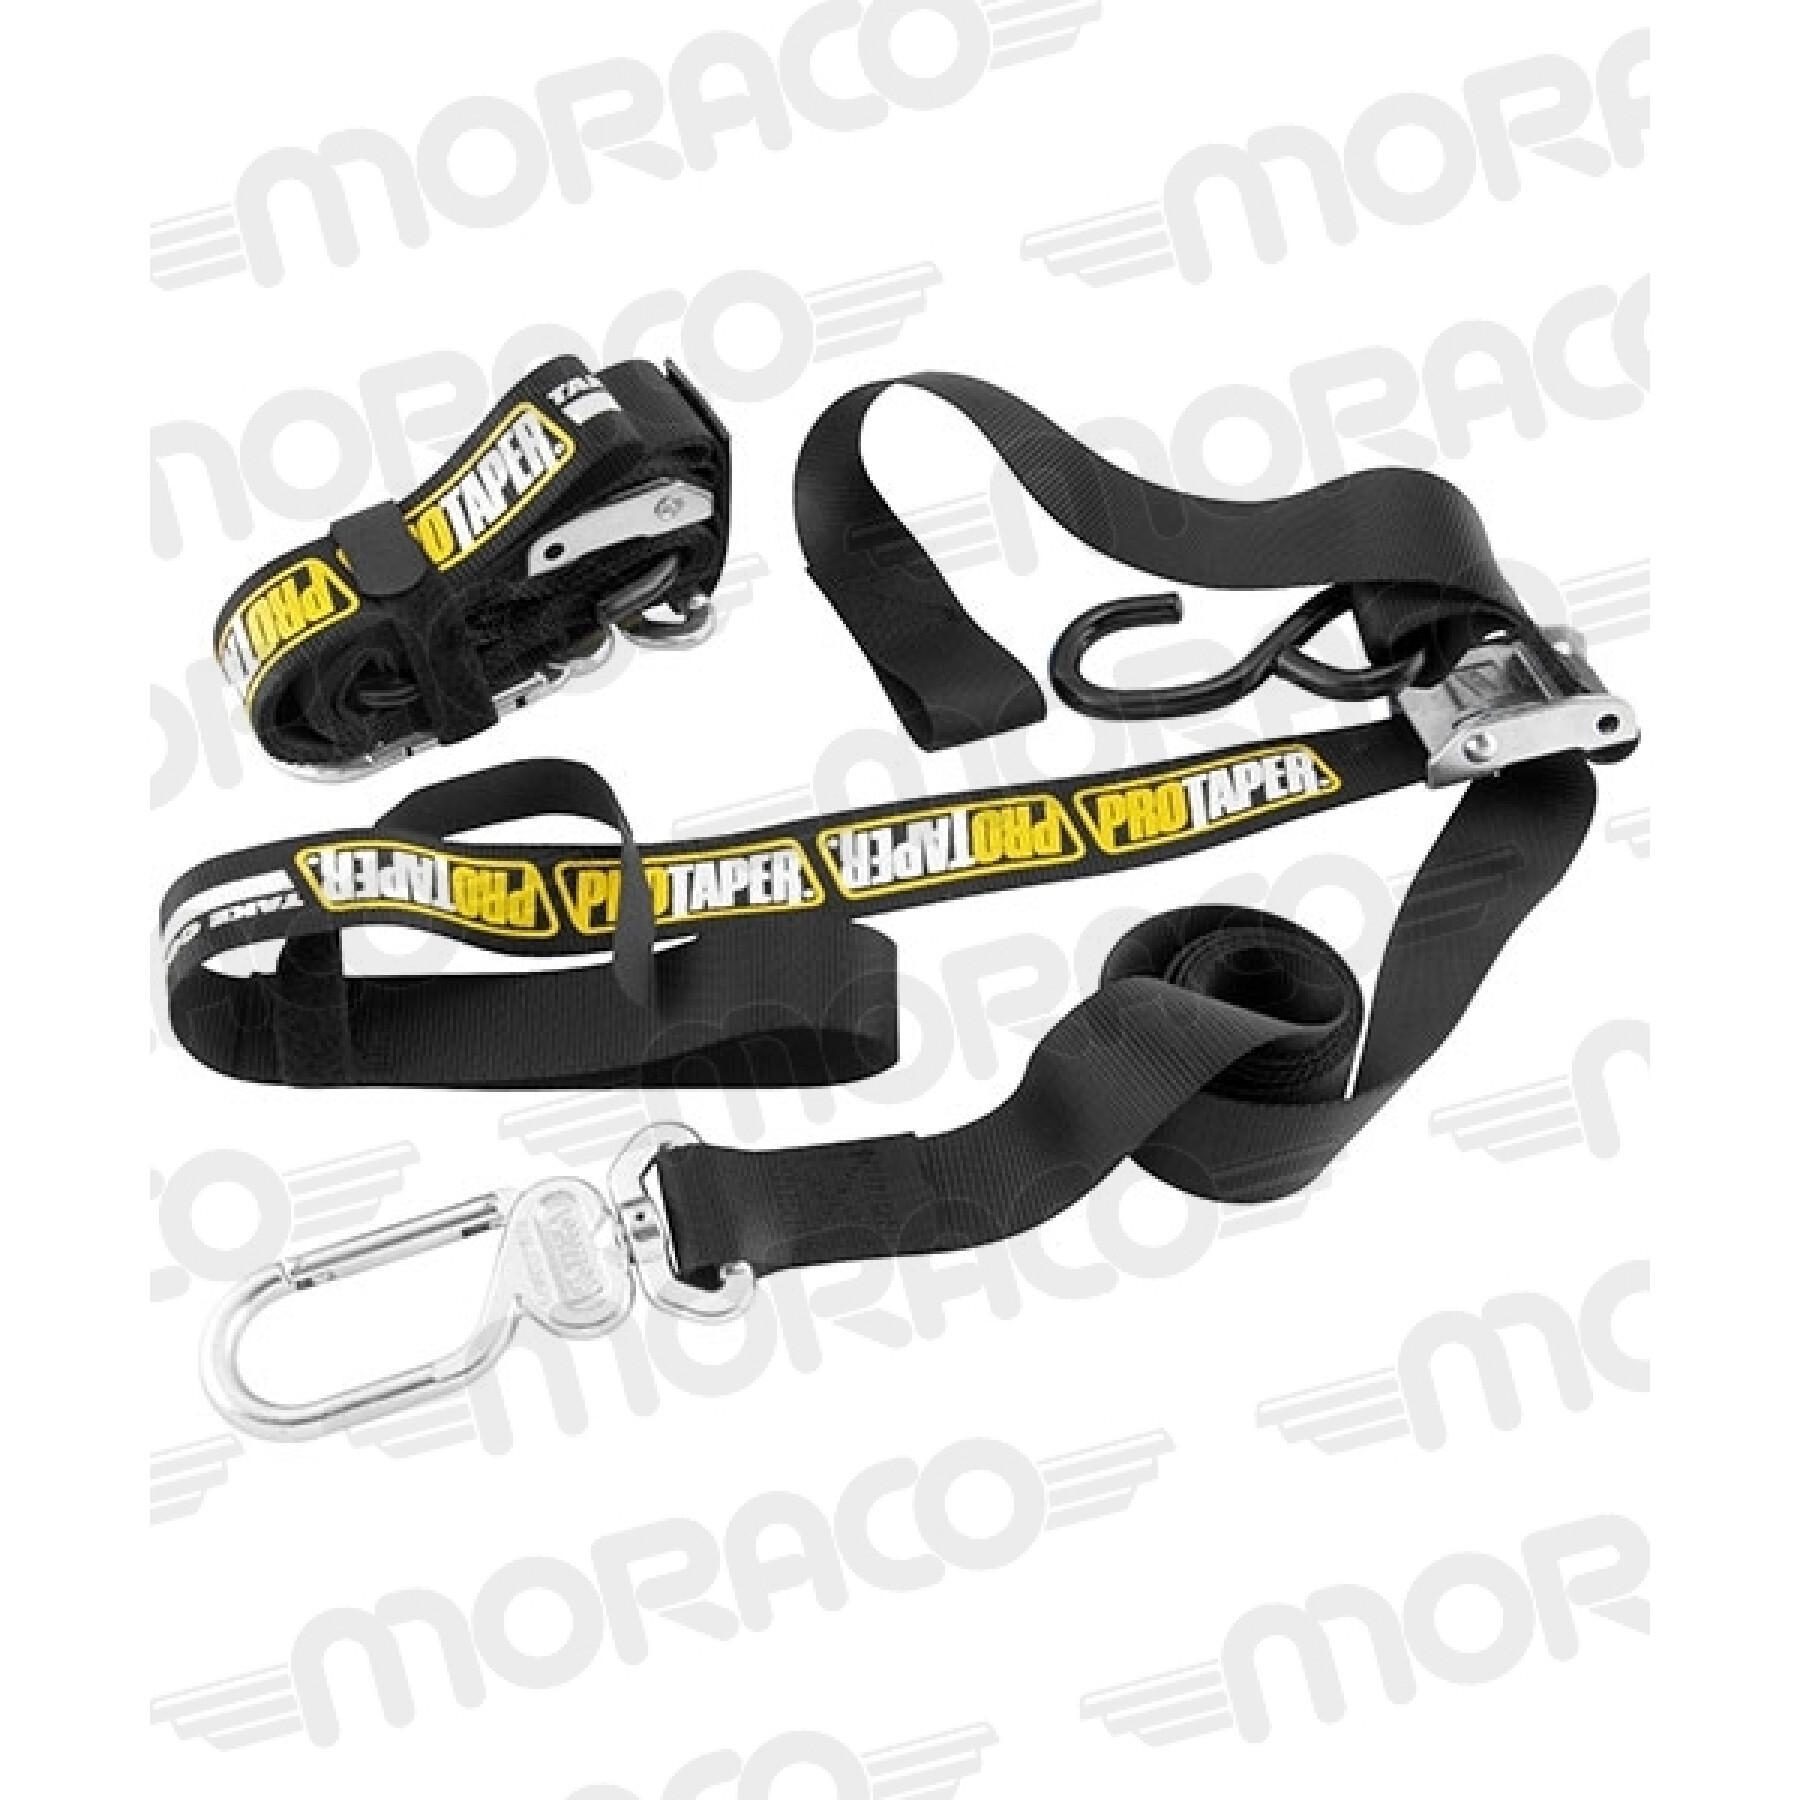 Motorcycle strap Protaper 11-099F